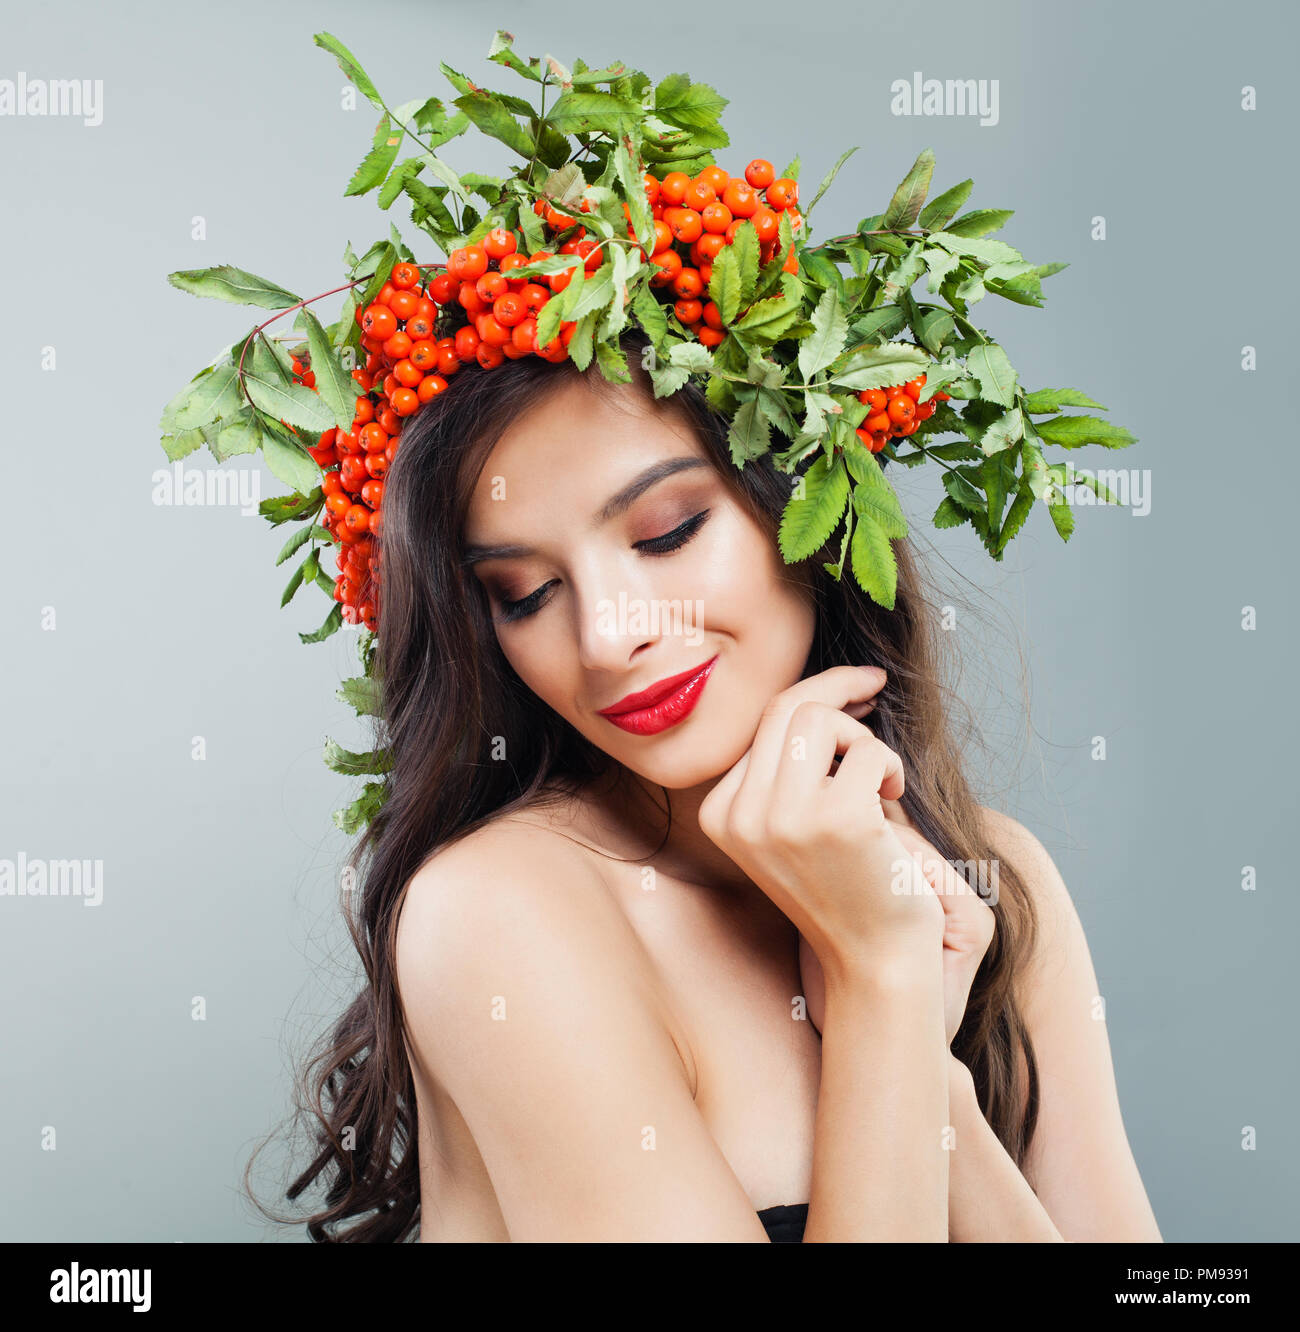 Young woman with red lips makeup, long permed hair and rowan berries and leaves wreath on head Stock Photo